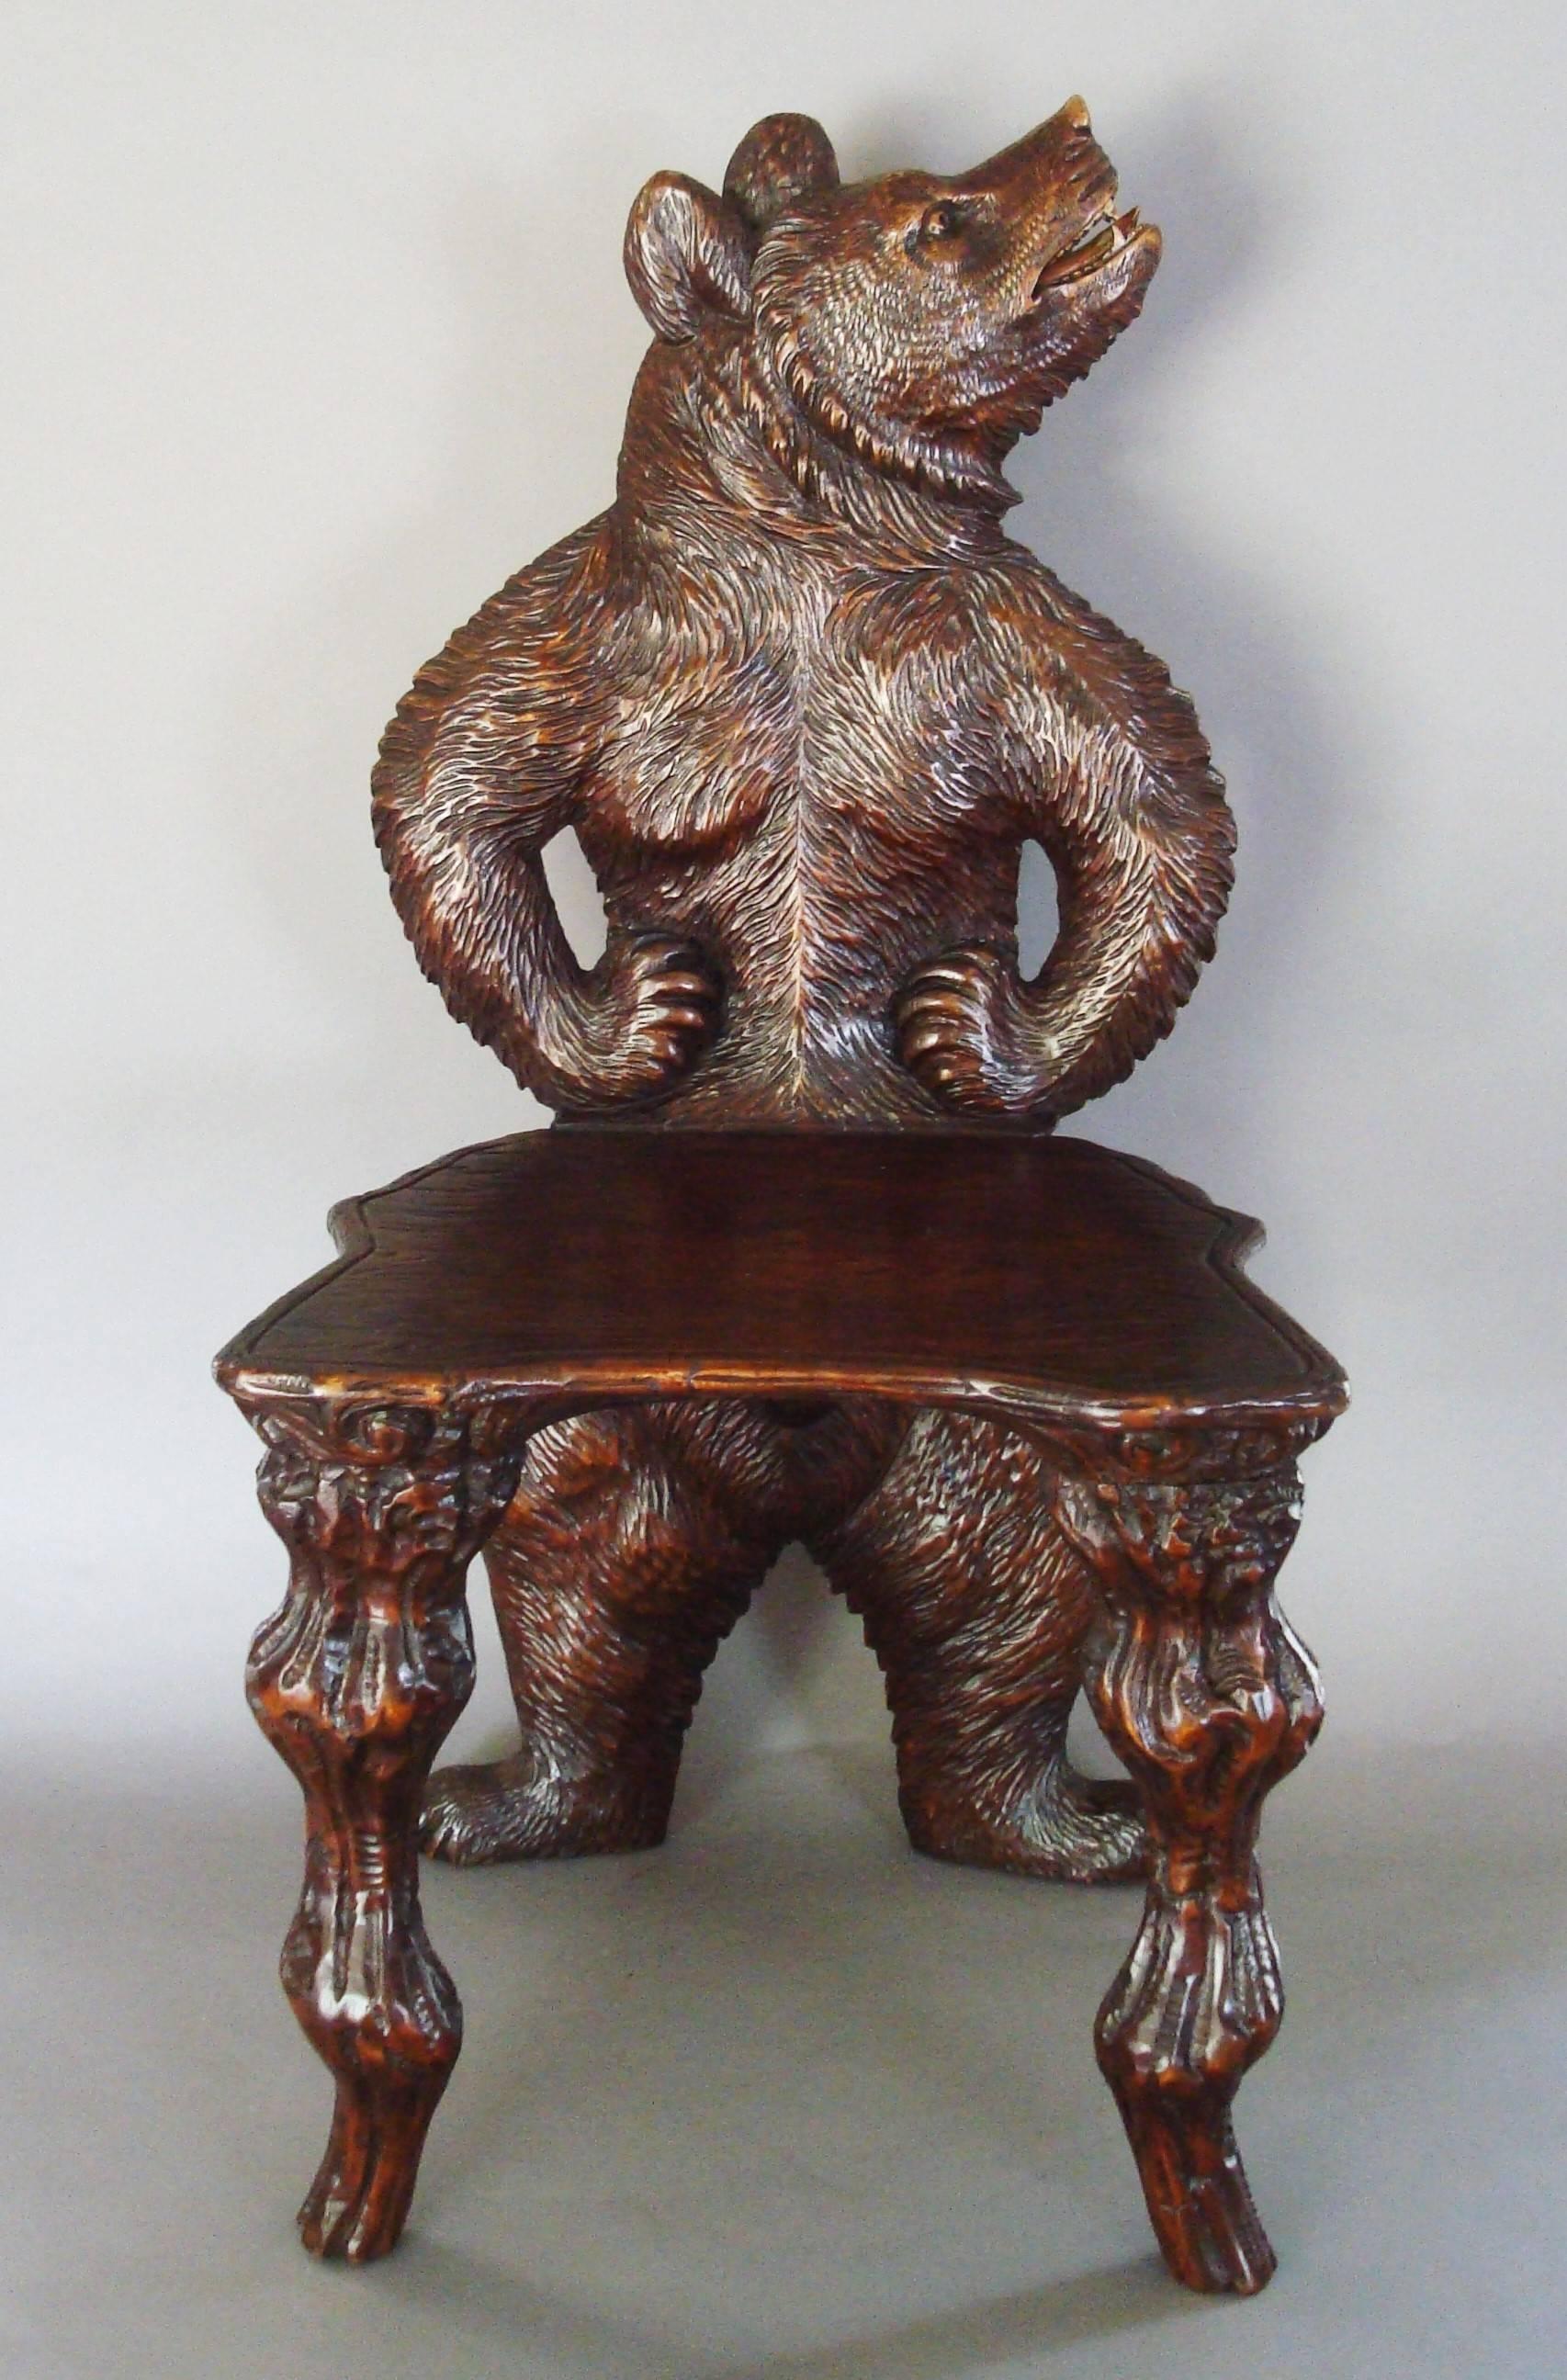 A superb 19th century Black Forest carved bear hall chair; the standing bear with attitude and his head raised with his mouth open showing his polychrome teeth and tongue, his arms and front paws resting on his hips in a whimsical fashion. The